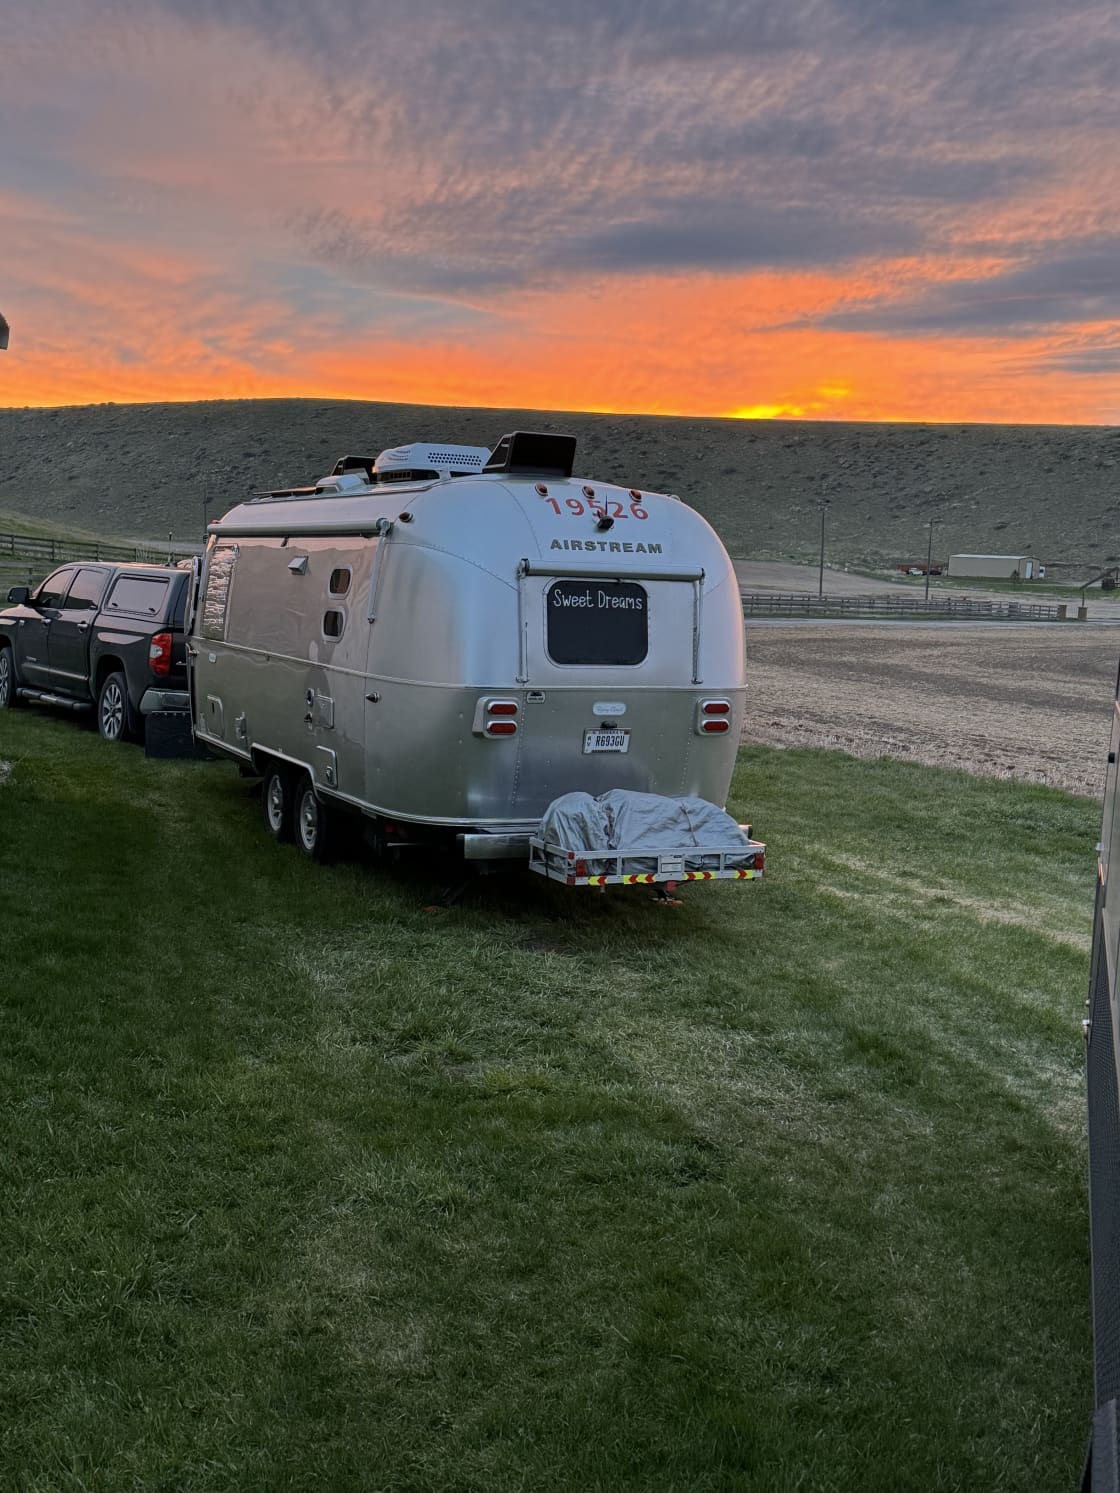 Airstream in the sunset!